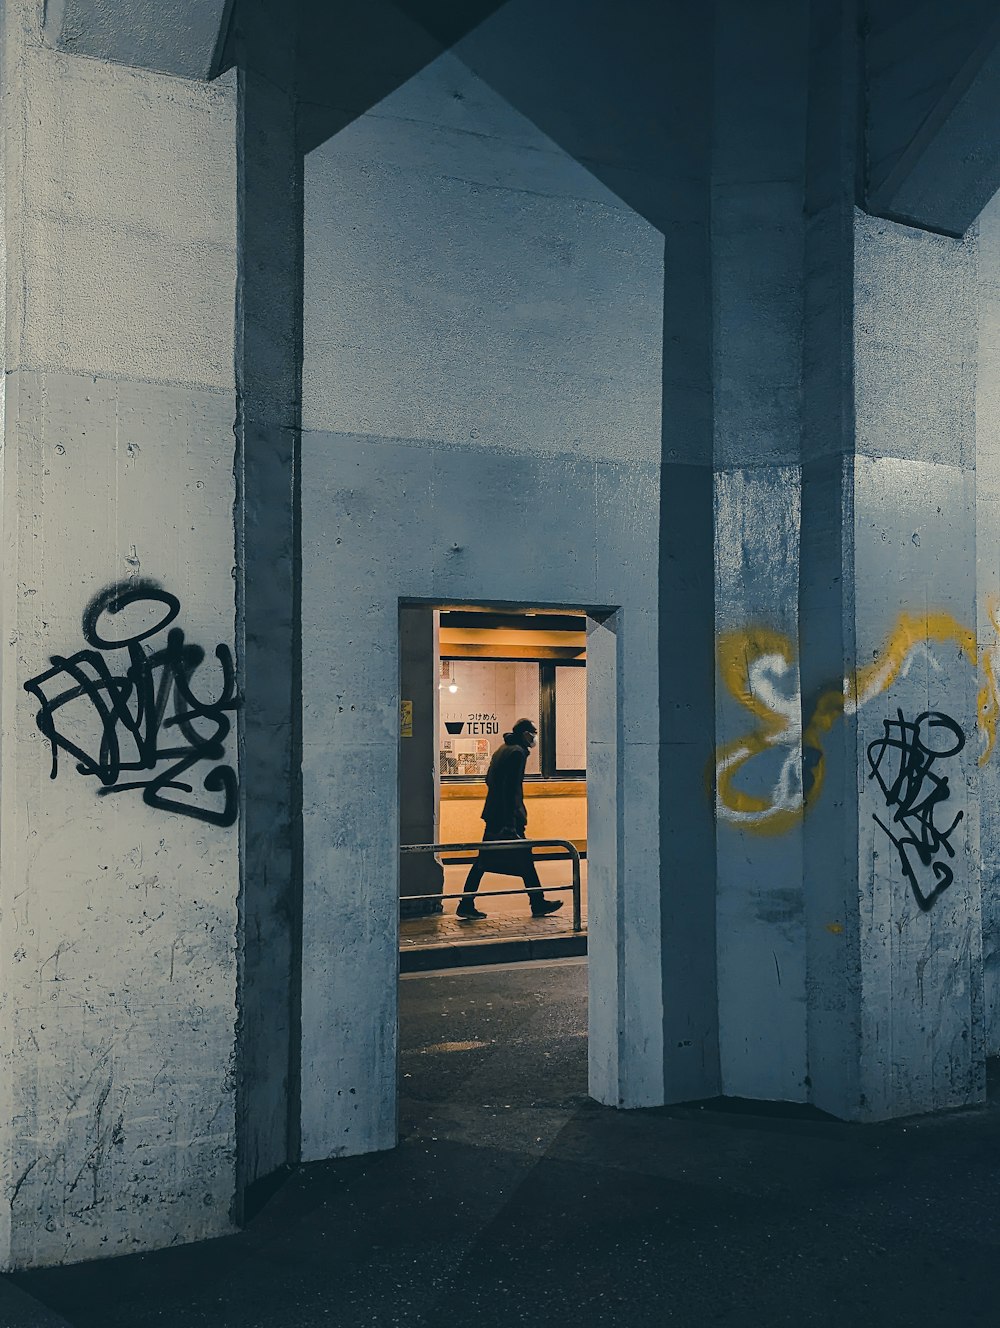 a person walking through a doorway with graffiti on the walls